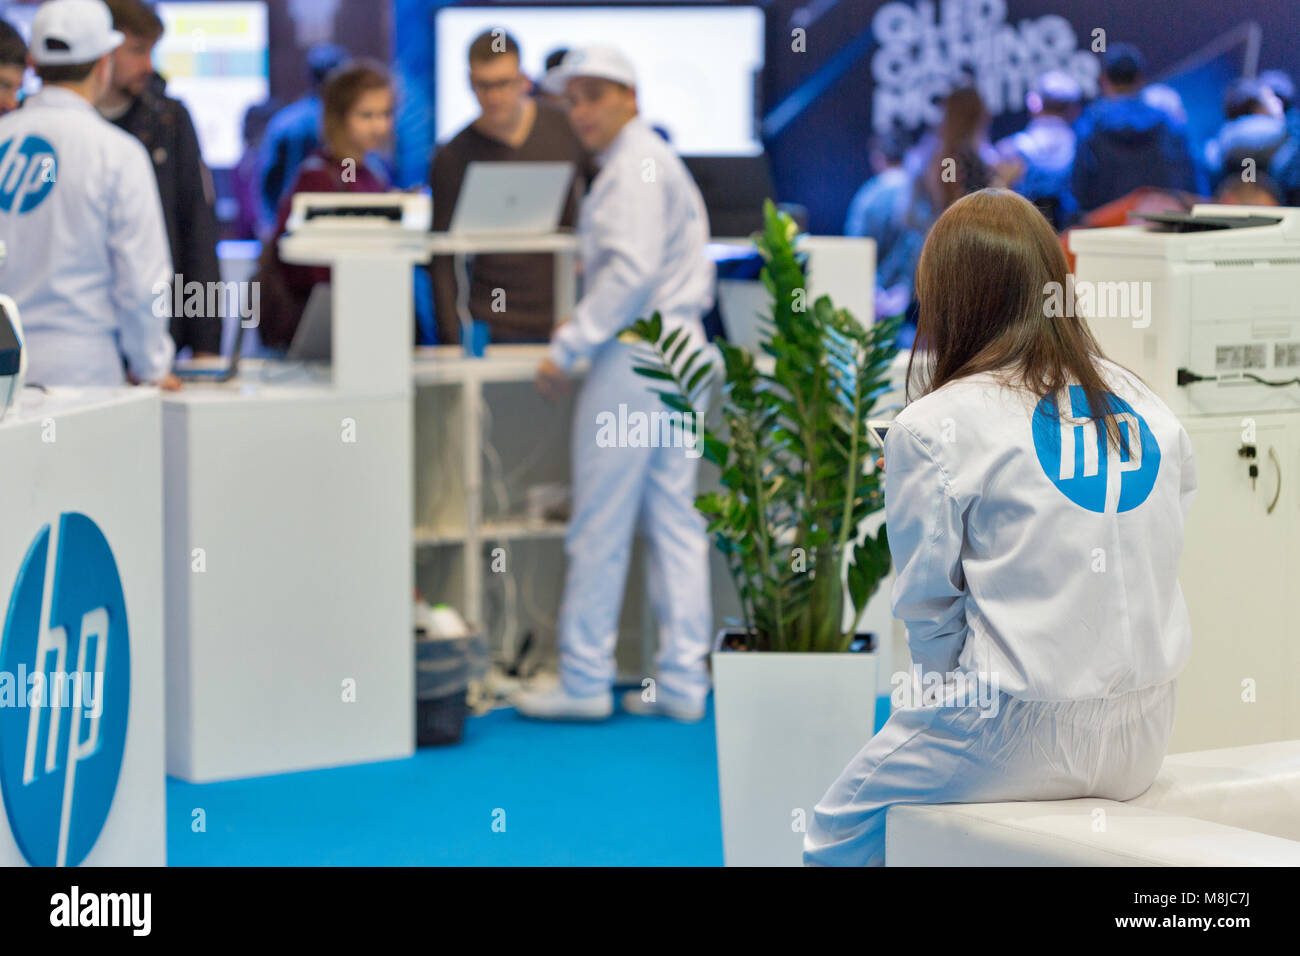 KIEV, UKRAINE - OCTOBER 08, 2017: People visit Hewlett-Packard, American multinational information technology company booth at CEE 2017, largest elect Stock Photo